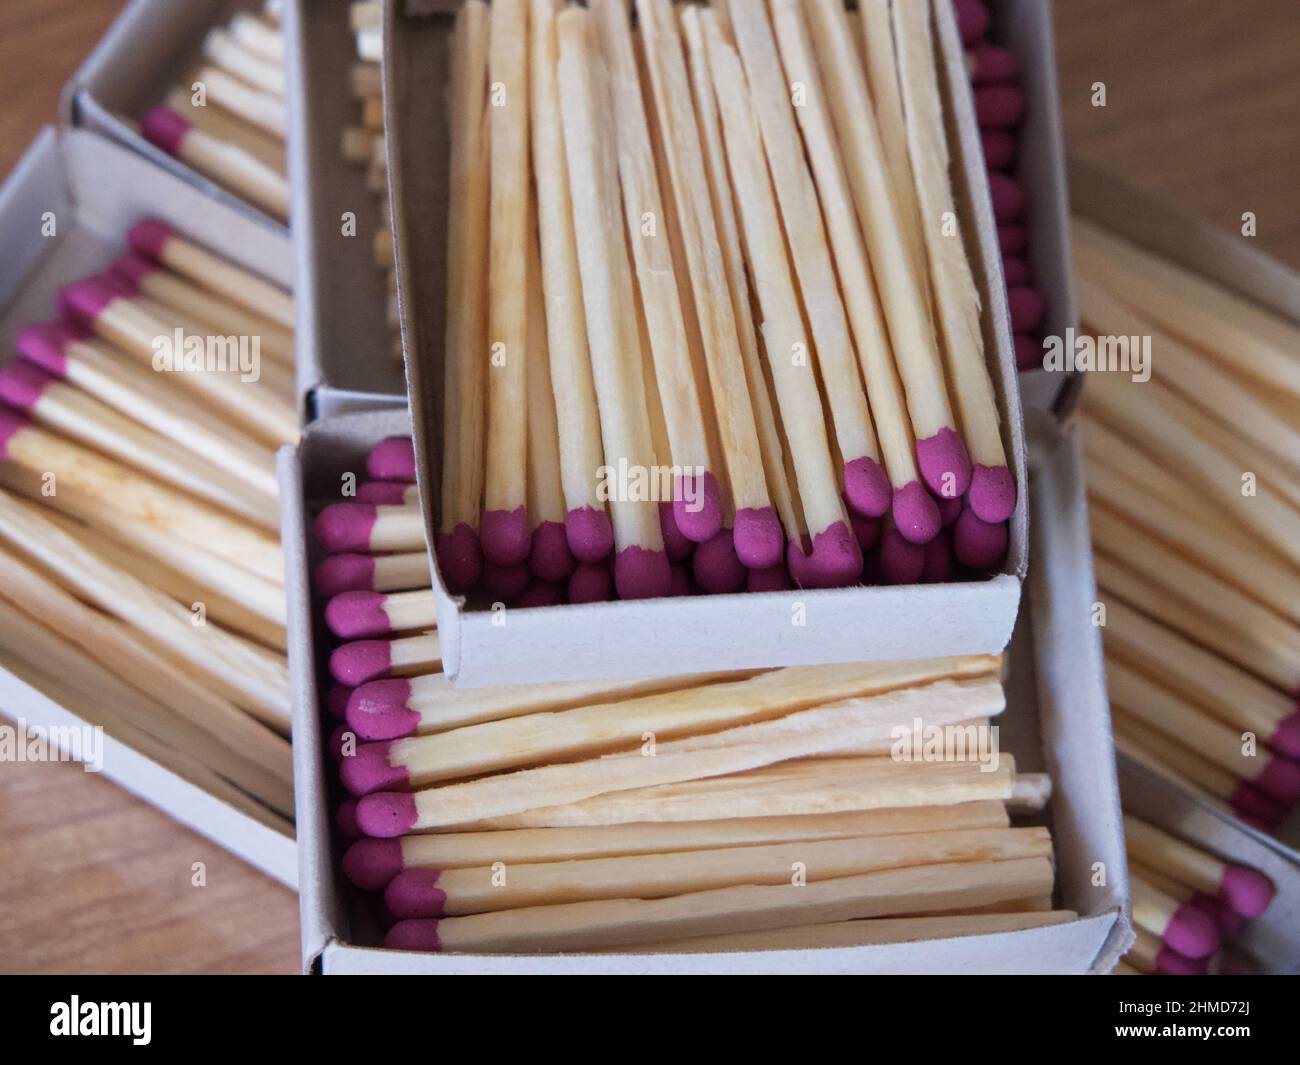 Several boxes filled with matches, a close-up shot. Matchboxes. Stock Photo